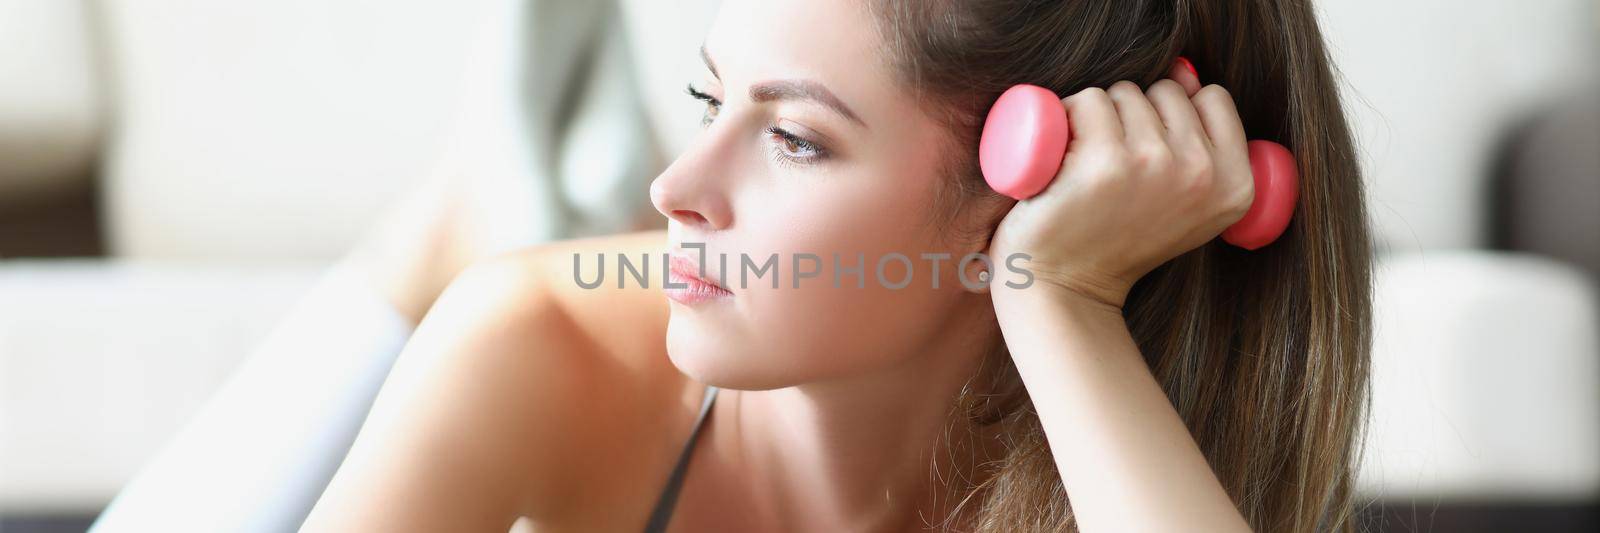 Portrait of young woman taking break between physical exercises laying on carpet. Pretty woman with pink dumbbells tool at home. Sport, weight loss concept